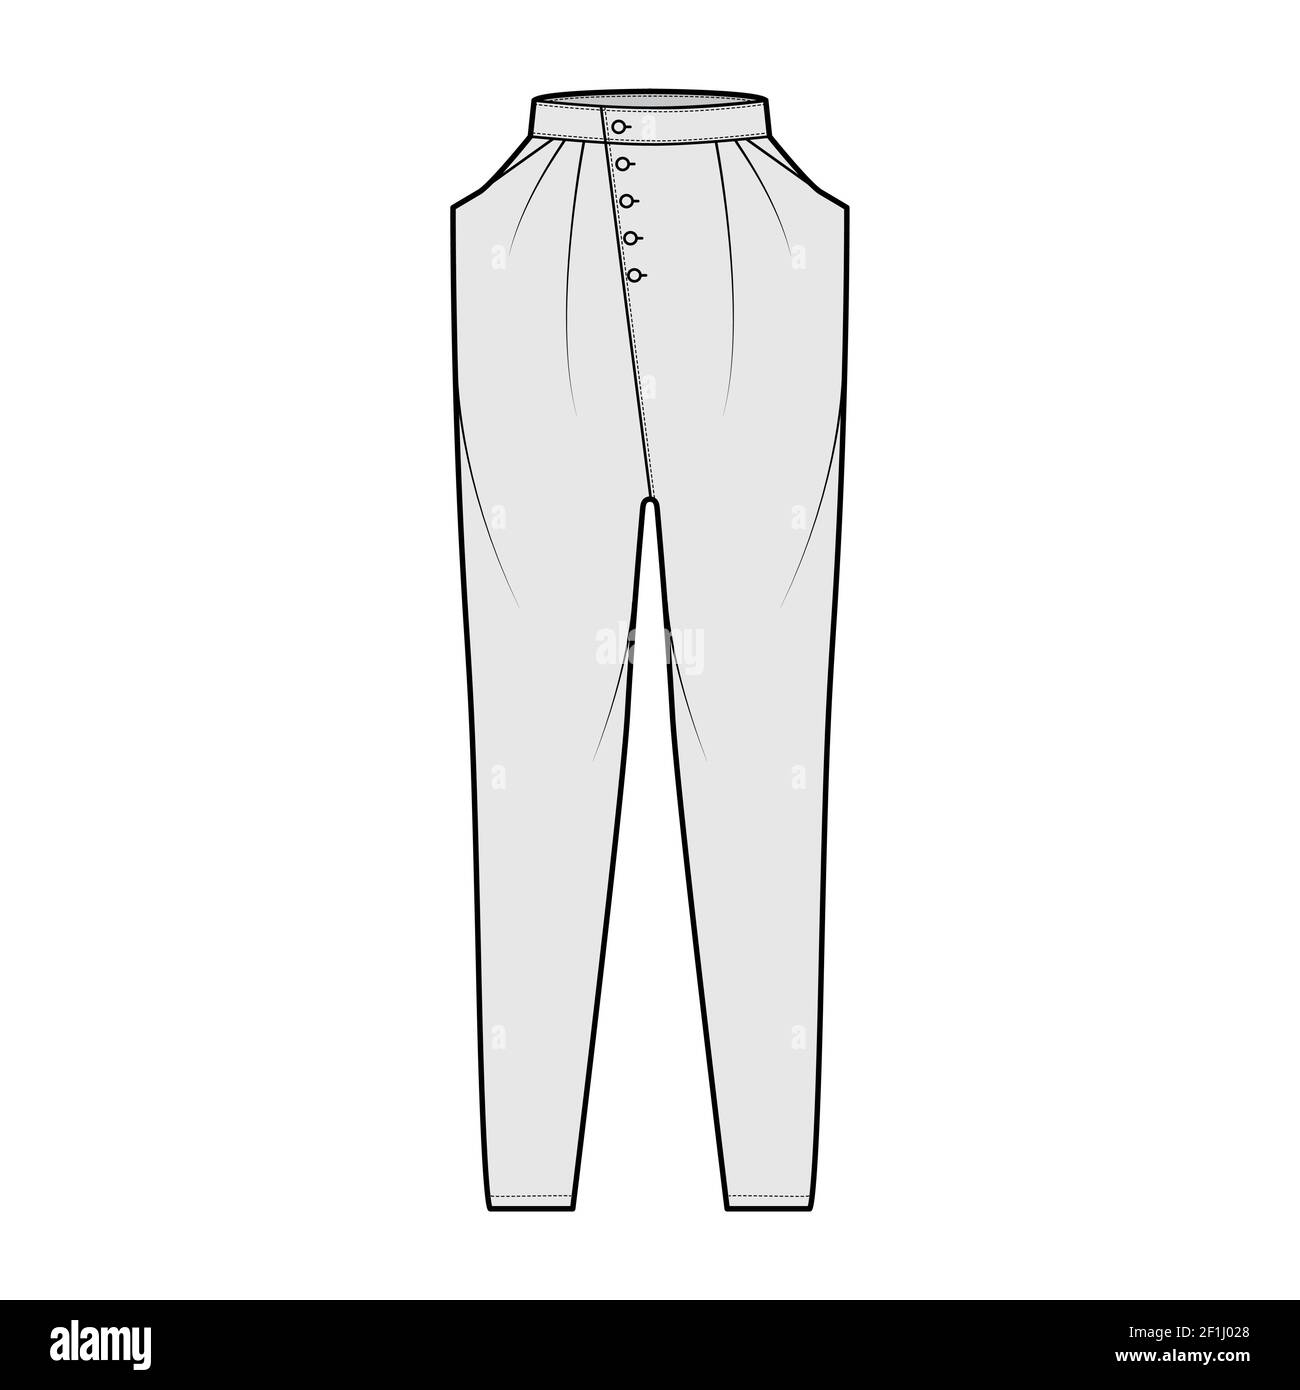 Tapered Baggy pants technical fashion illustration with normal waist high  rise slash pockets draping front full lengths Flat bottom apparel  template white color style Women unisex CAD mockup Stock Vector Image 